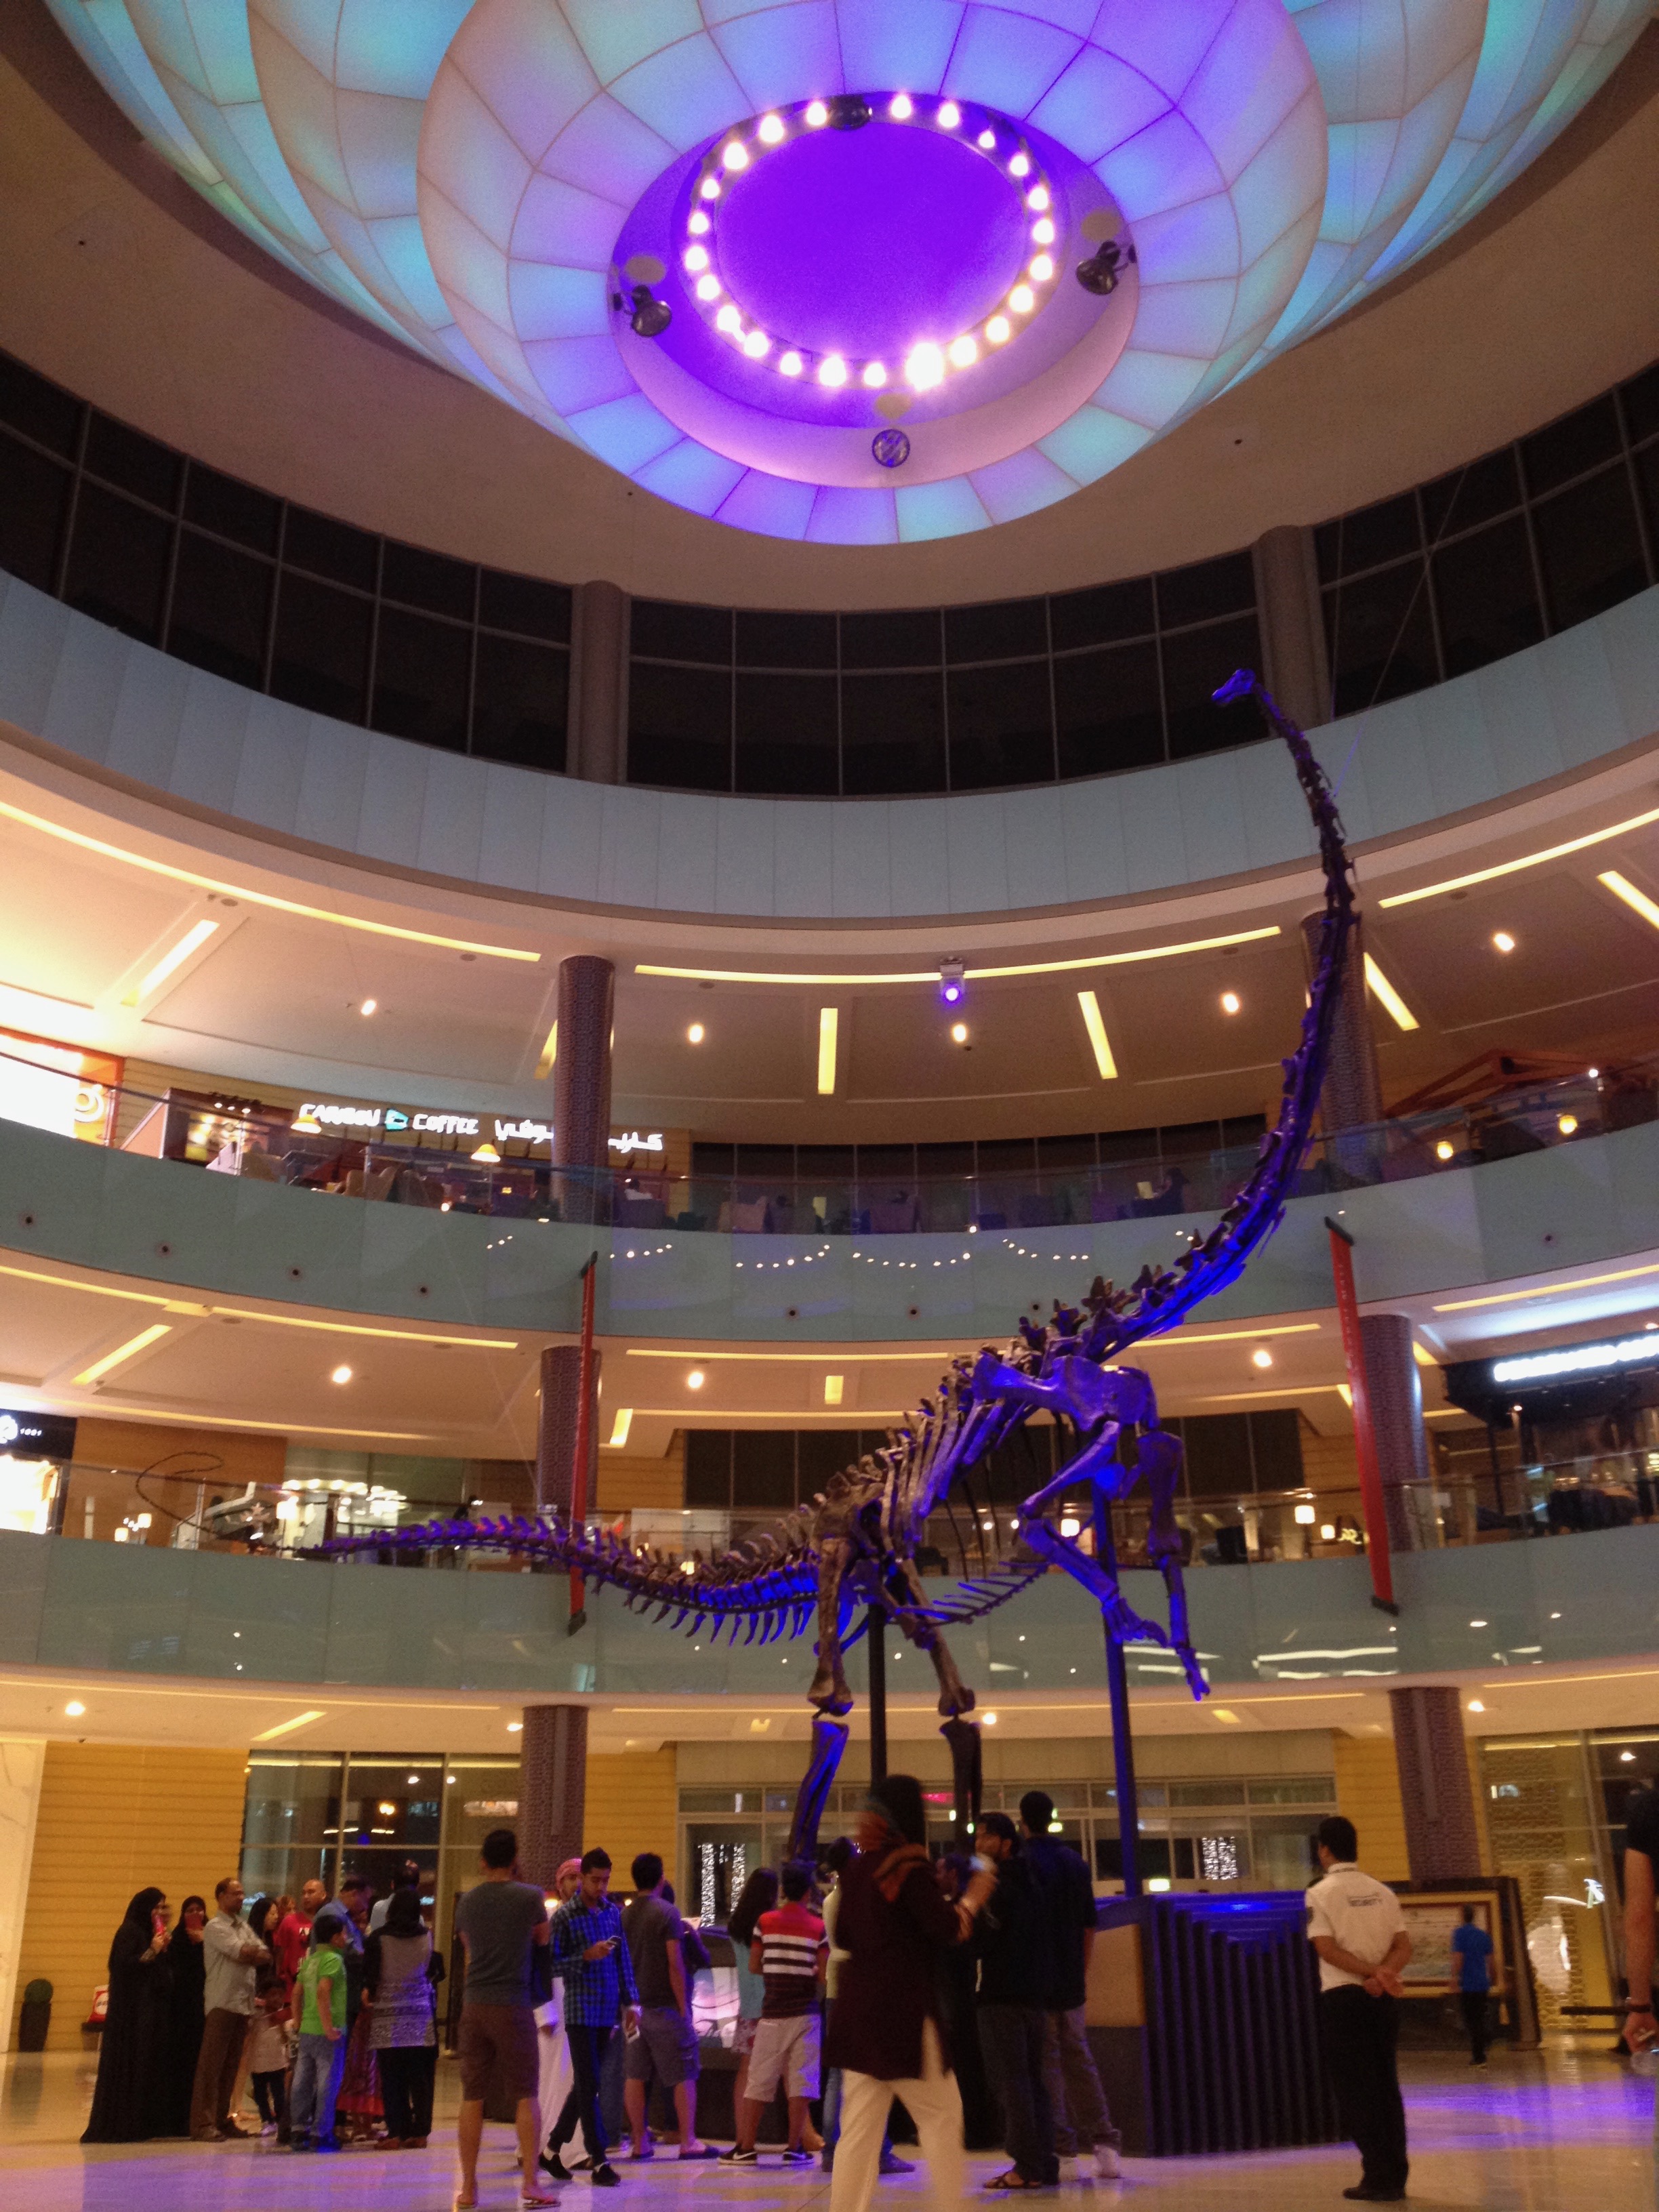 dinosaur fossil in middle of a shopping mall